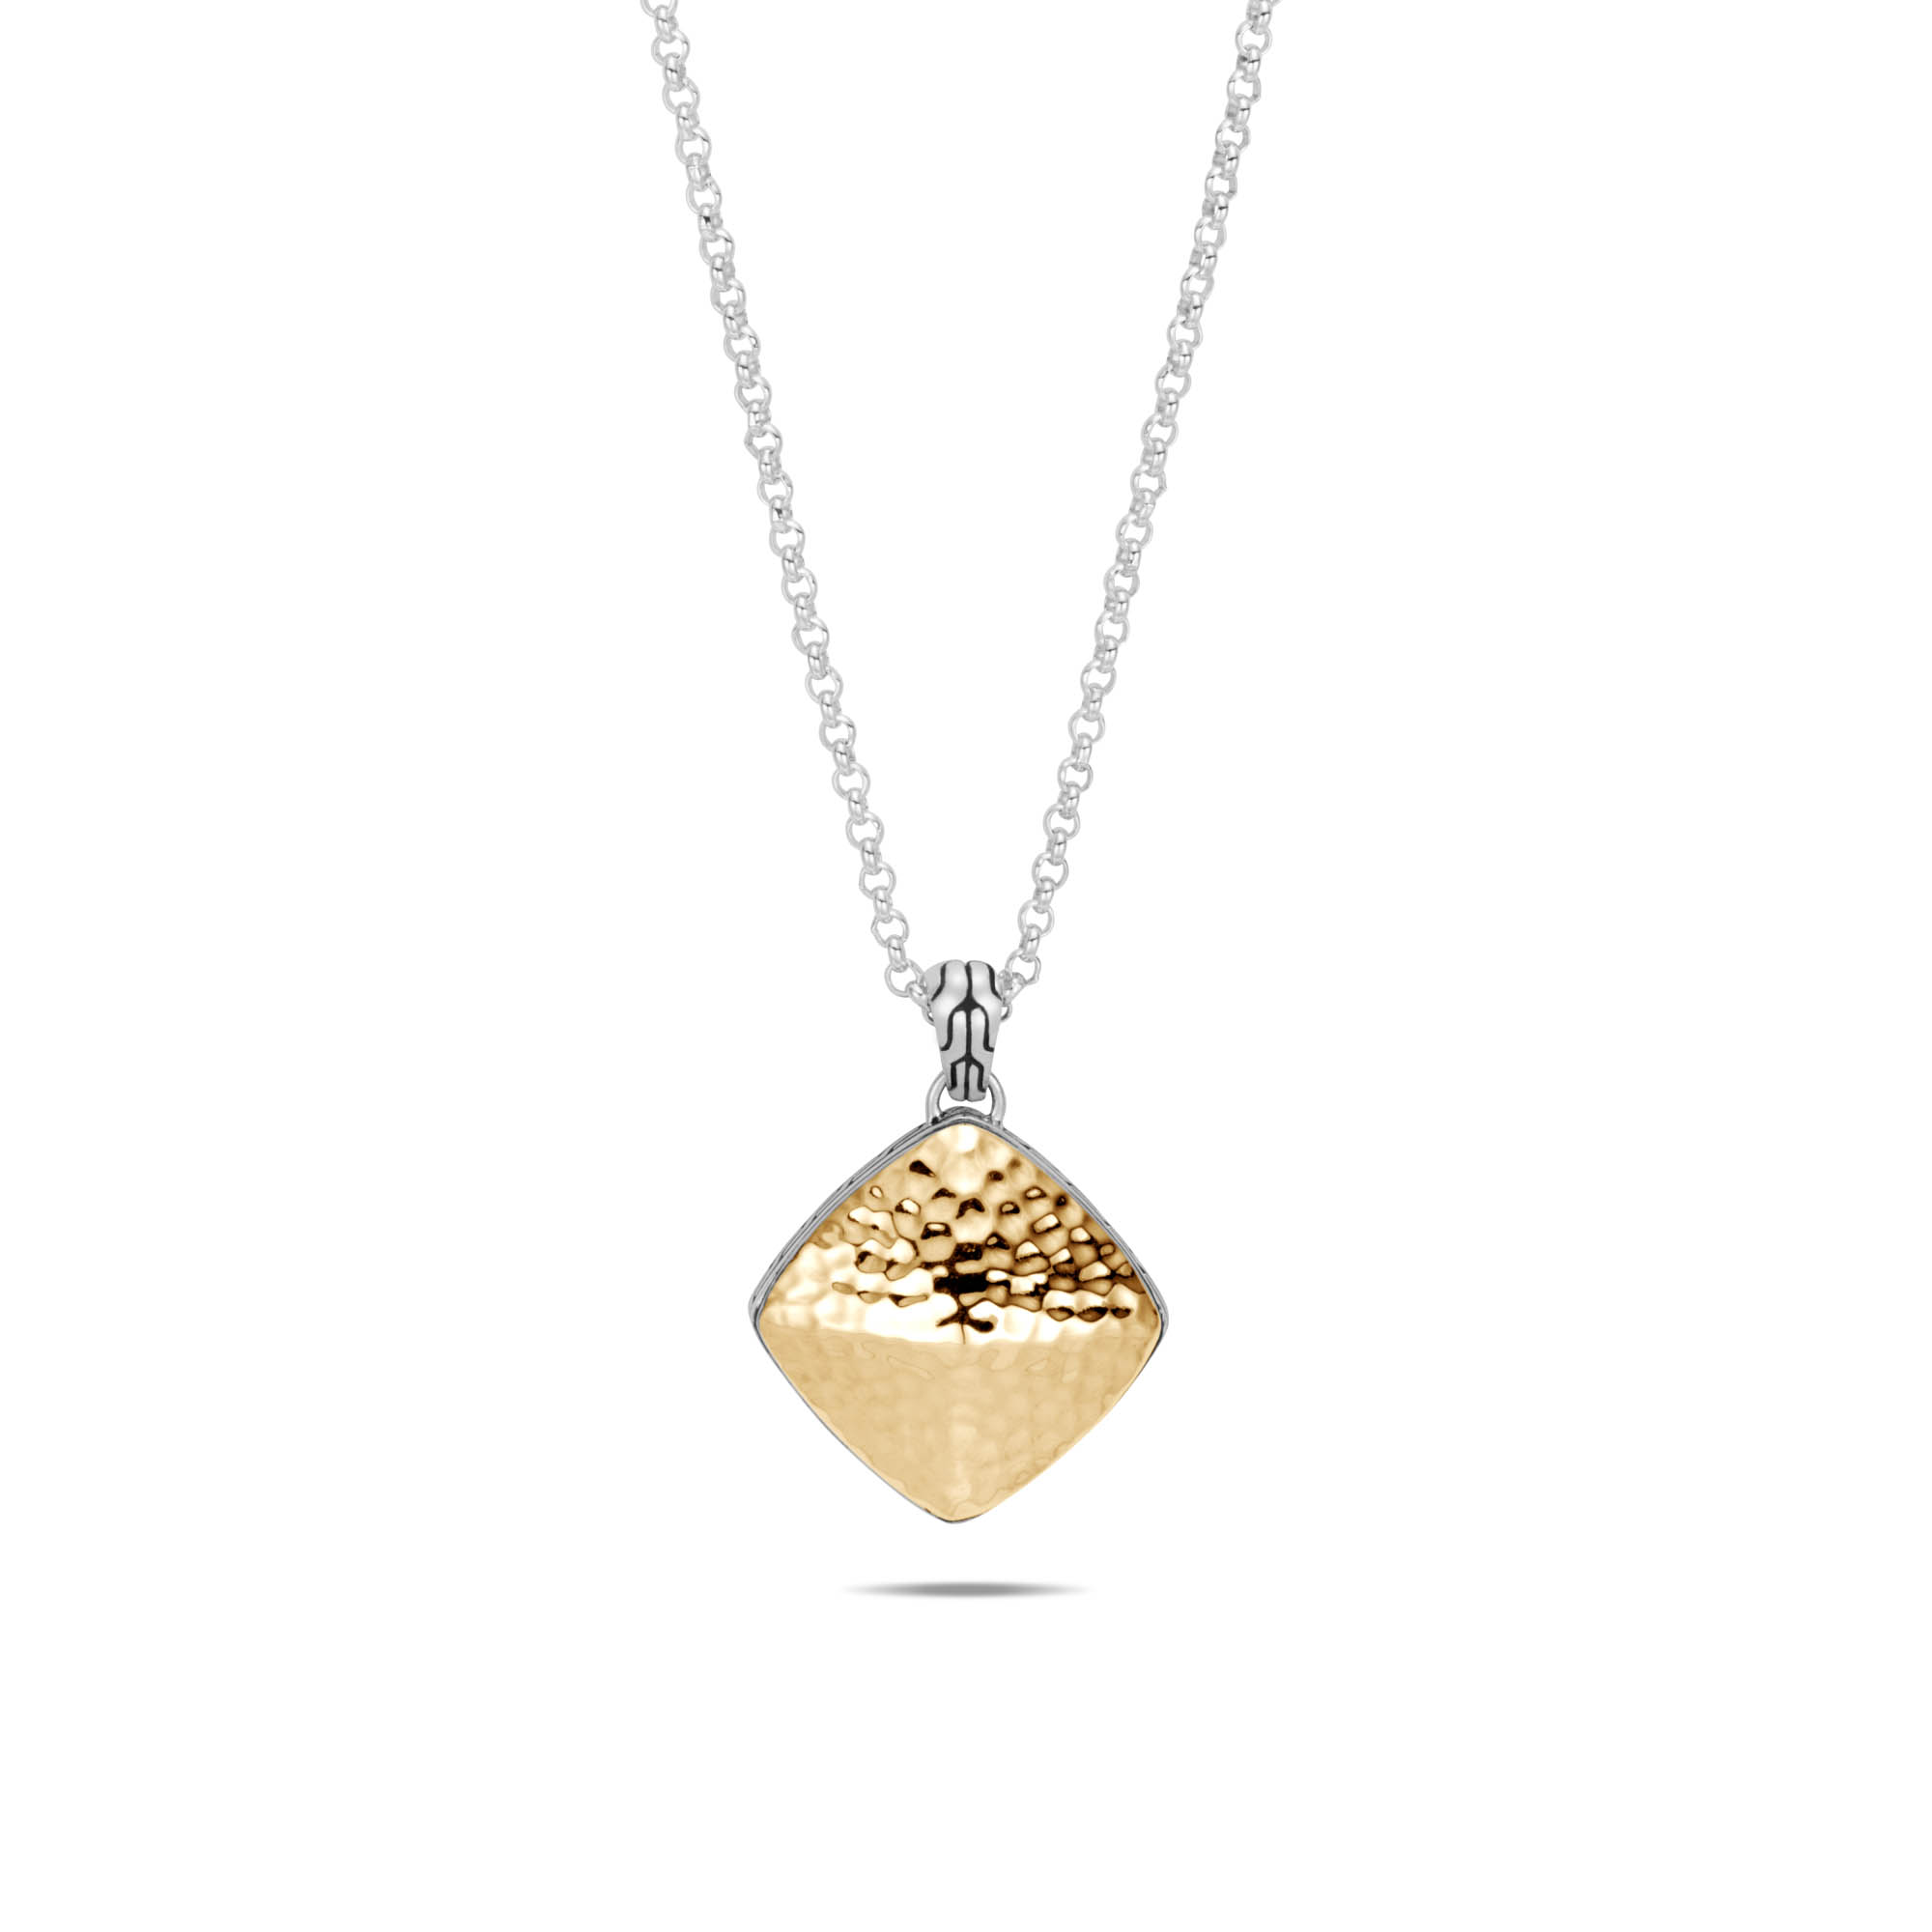 453831Classic-Chain-Hammered-Sugarloaf-Pendant-Necklace.jpg